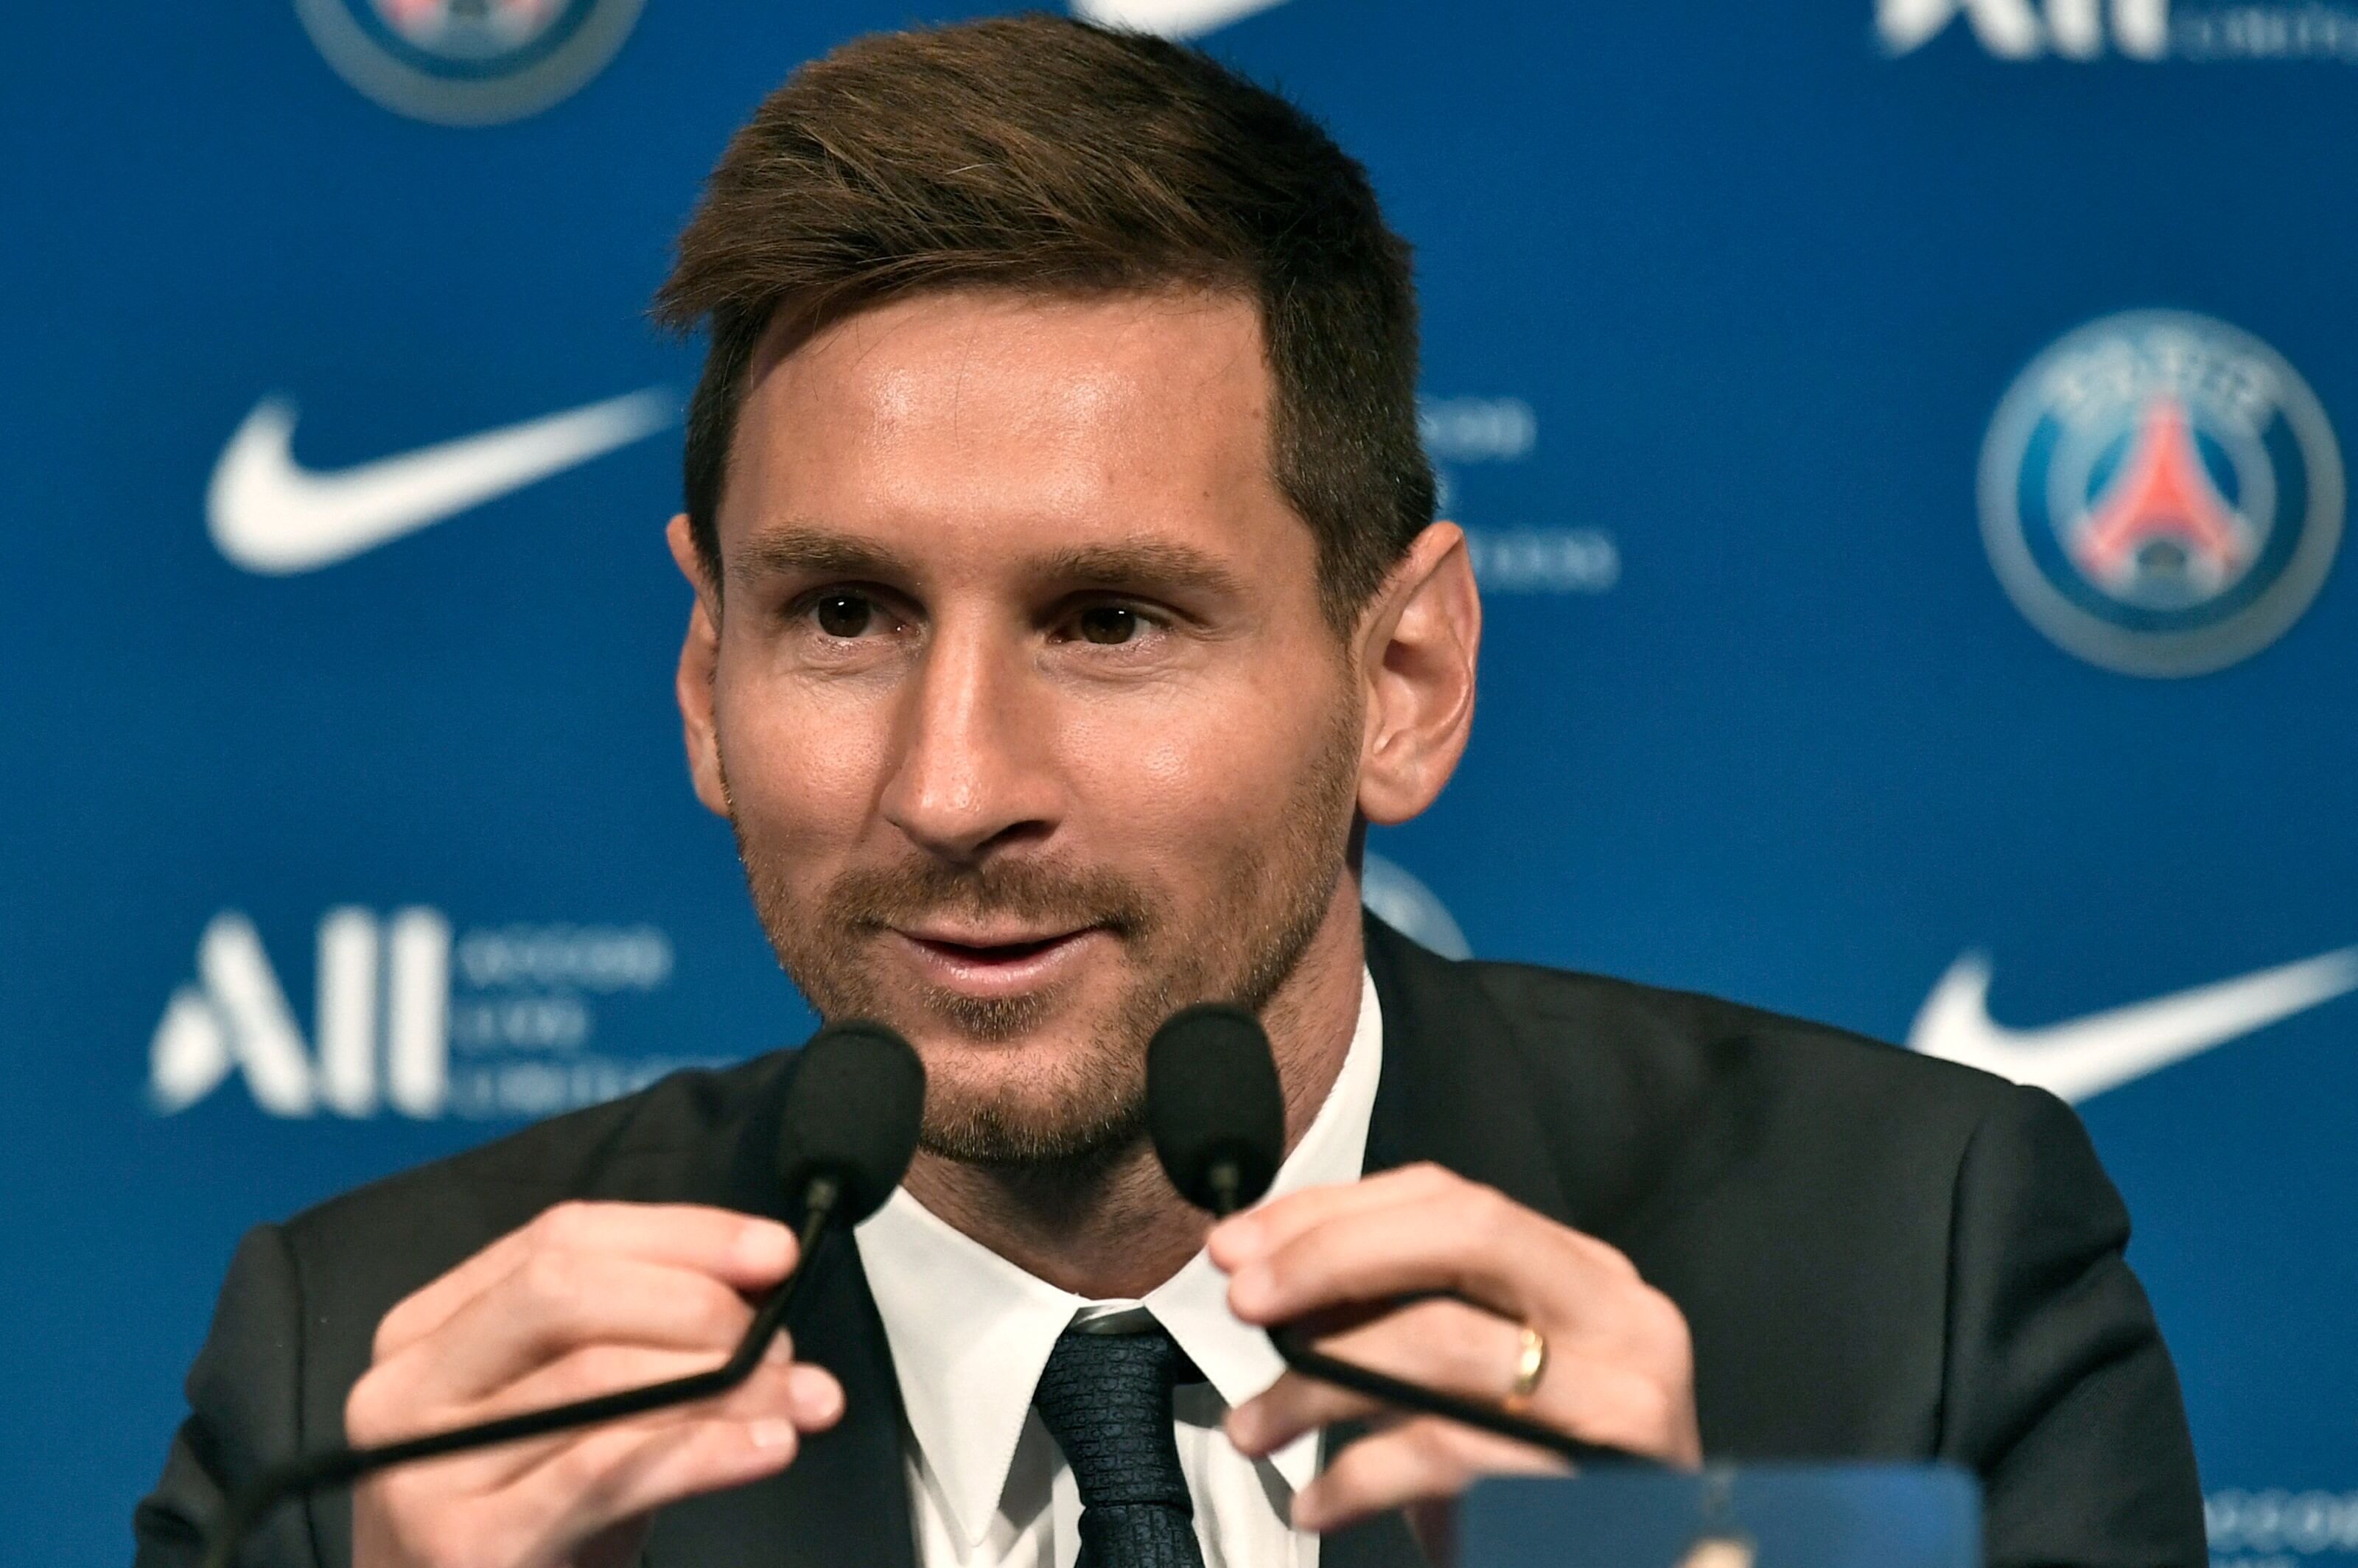 'Maybe I need a pre-season' - Messi unsure when he will make PSG debut after joining French giants on free transfer